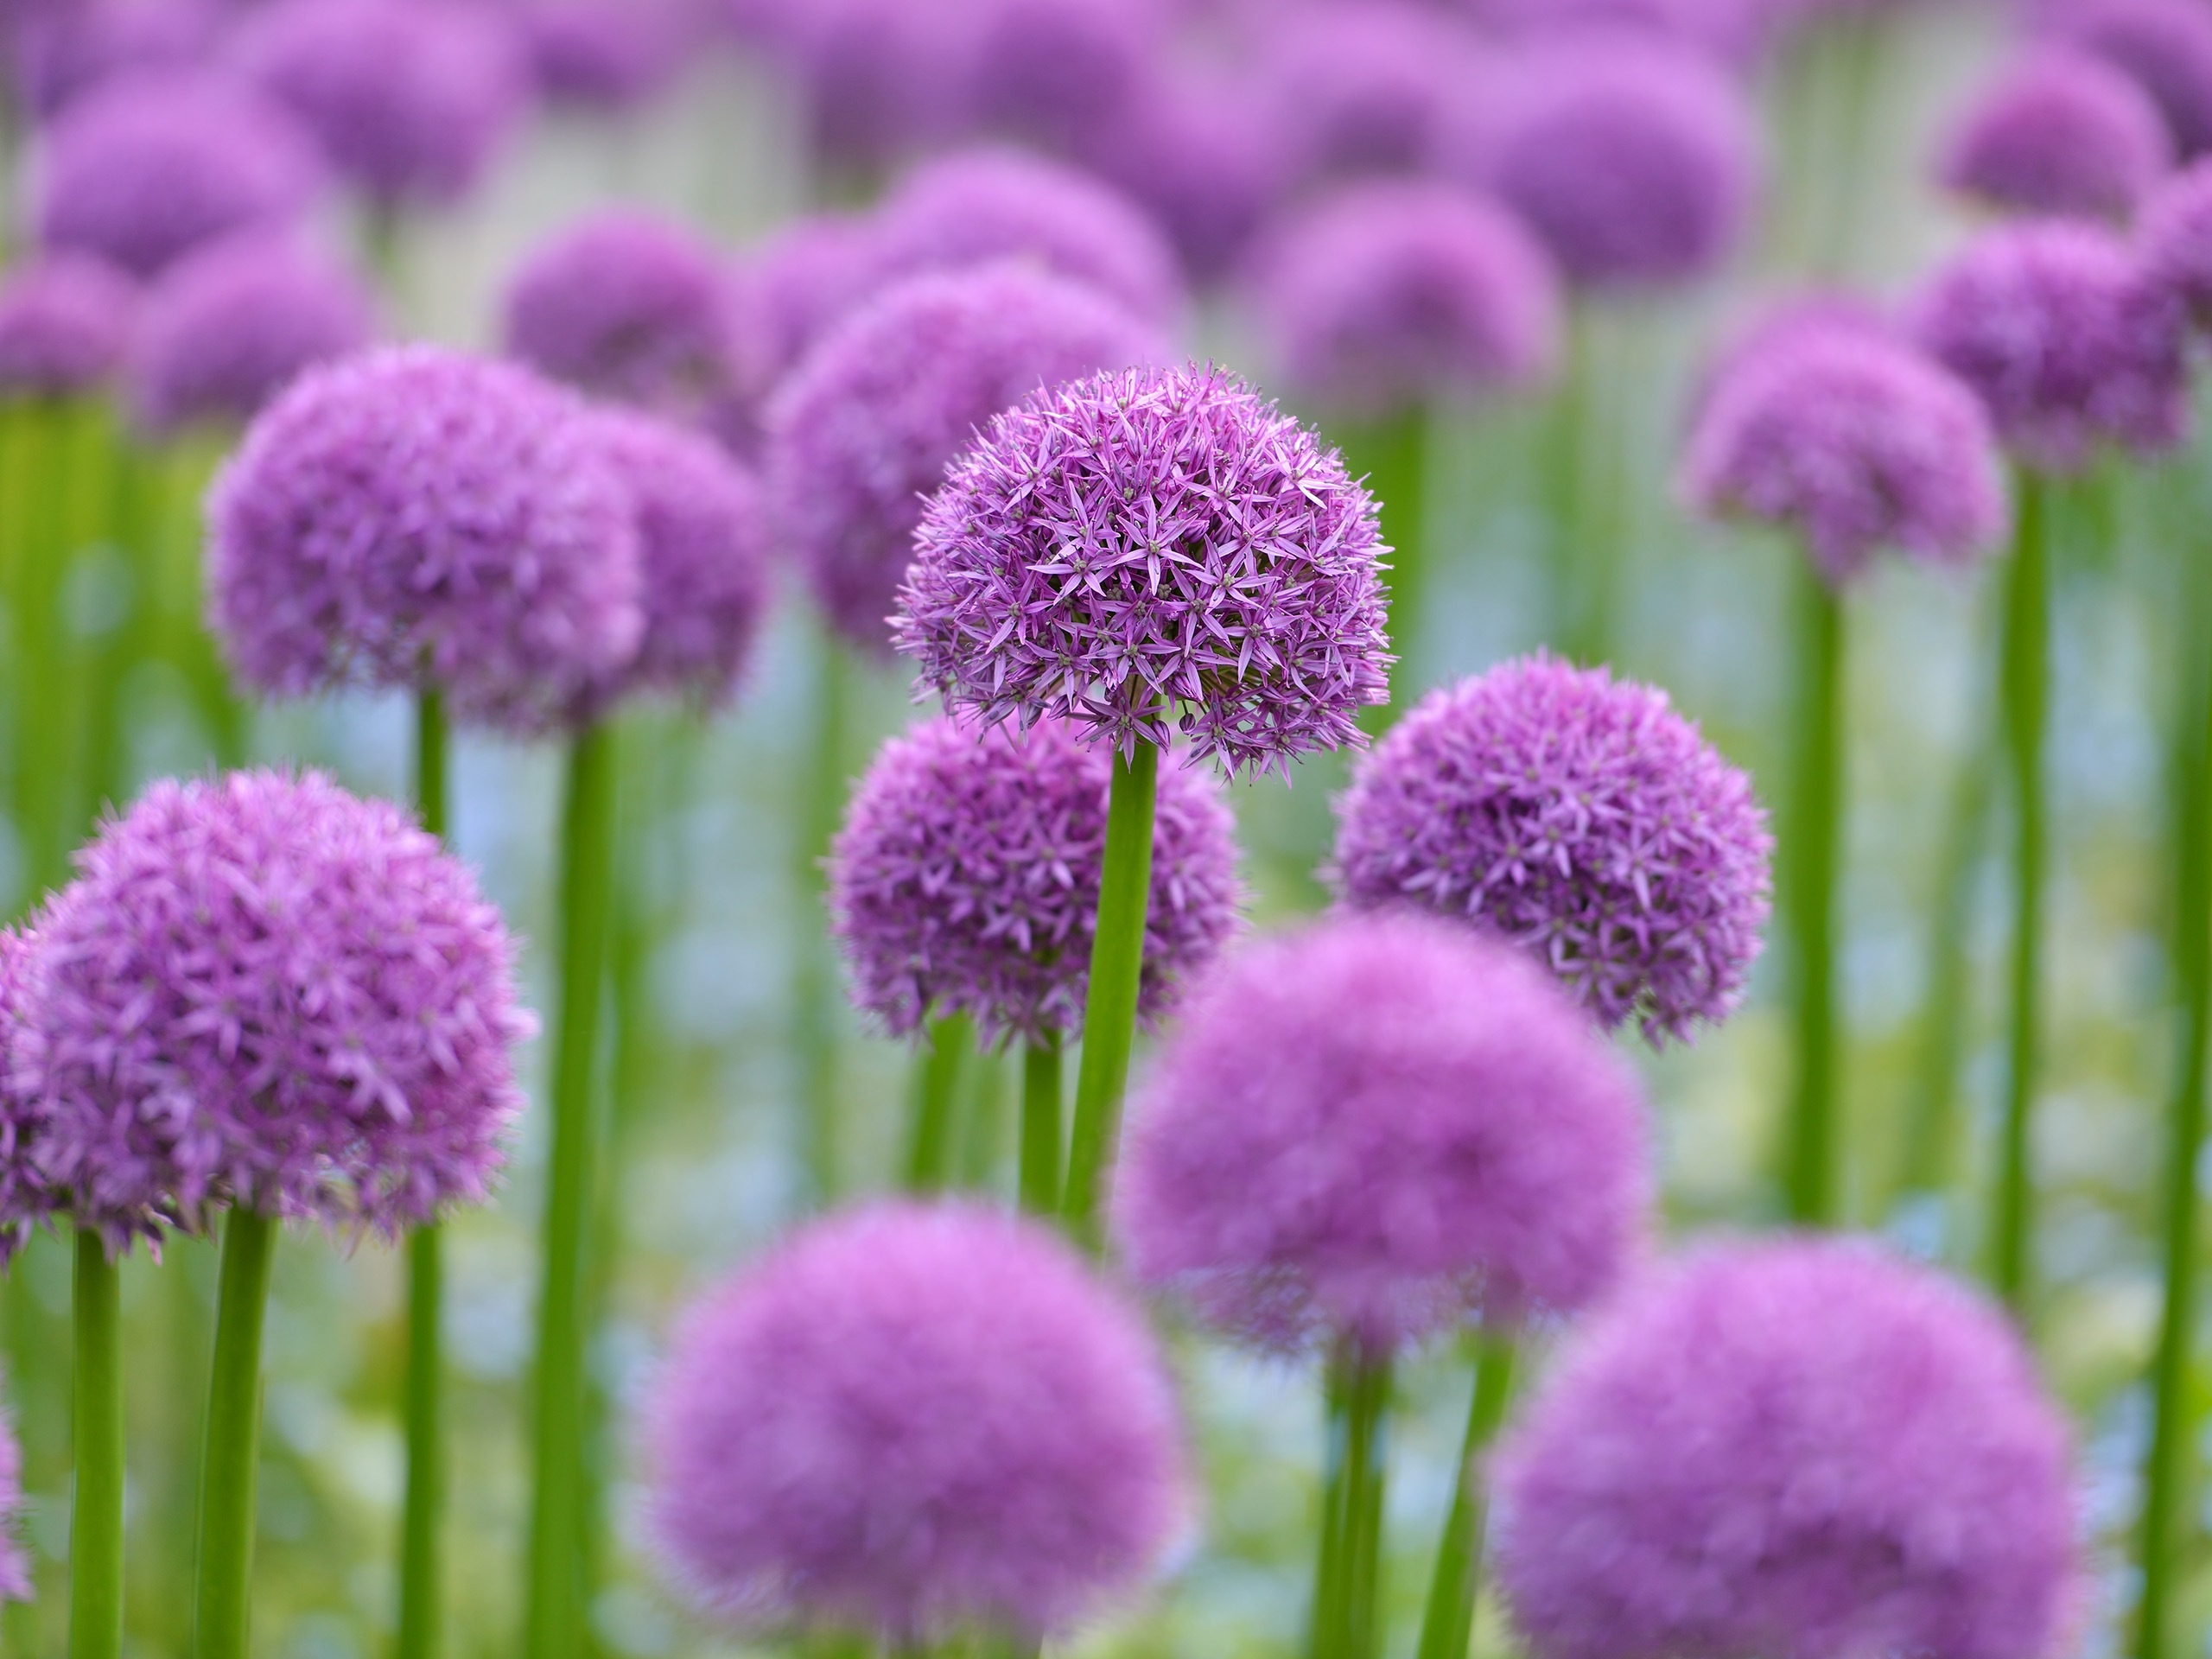 Large rounded purple flower heads on tall green stalks.